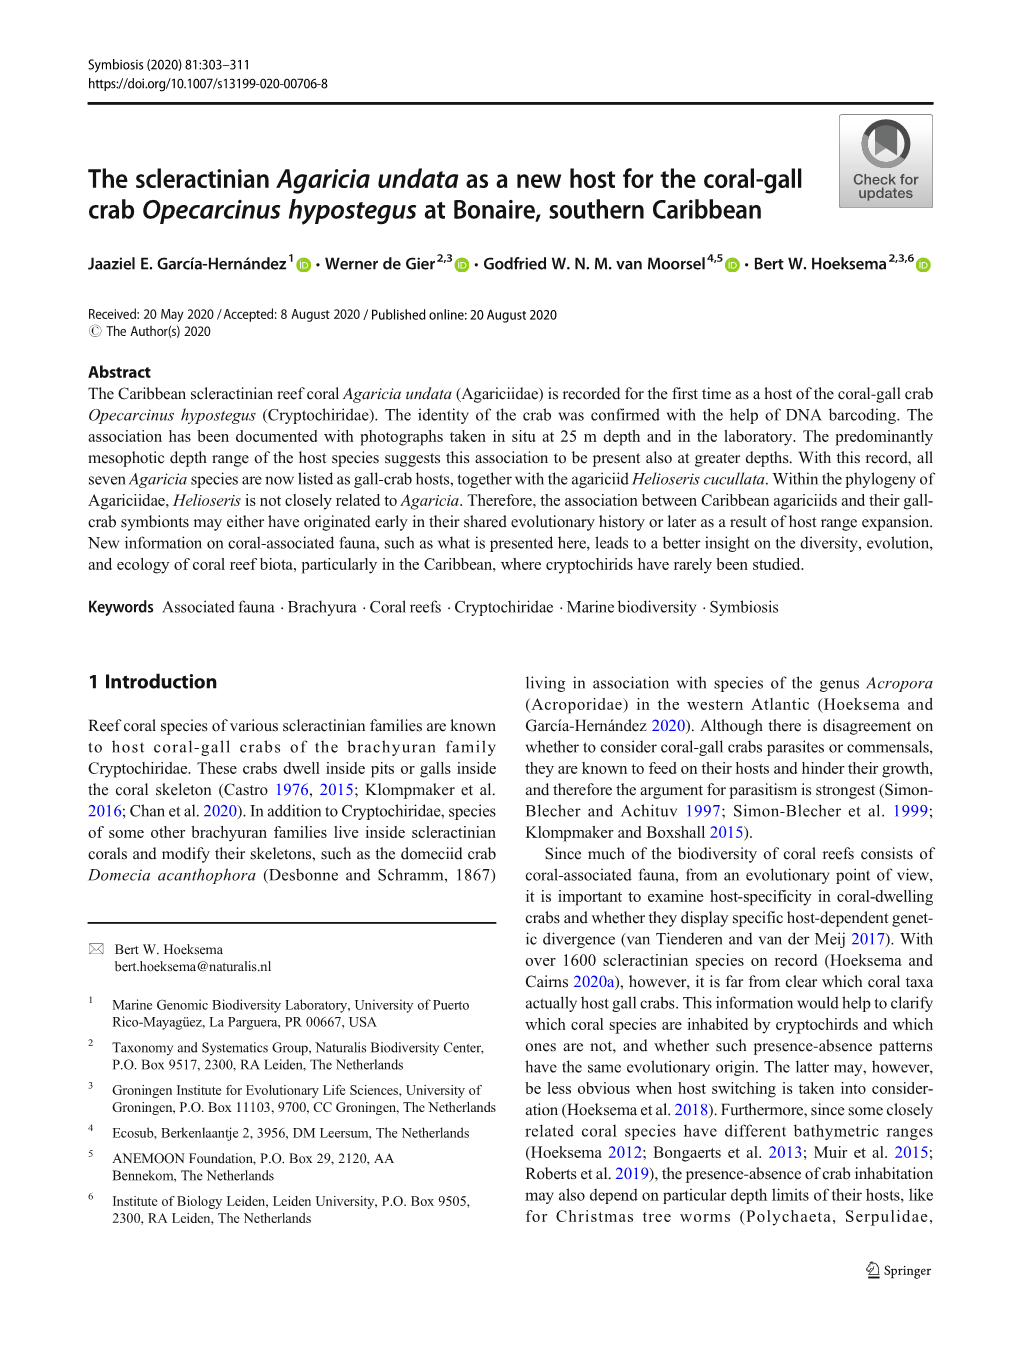 The Scleractinian Agaricia Undata As a New Host for the Coral-Gall Crab Opecarcinus Hypostegus at Bonaire, Southern Caribbean